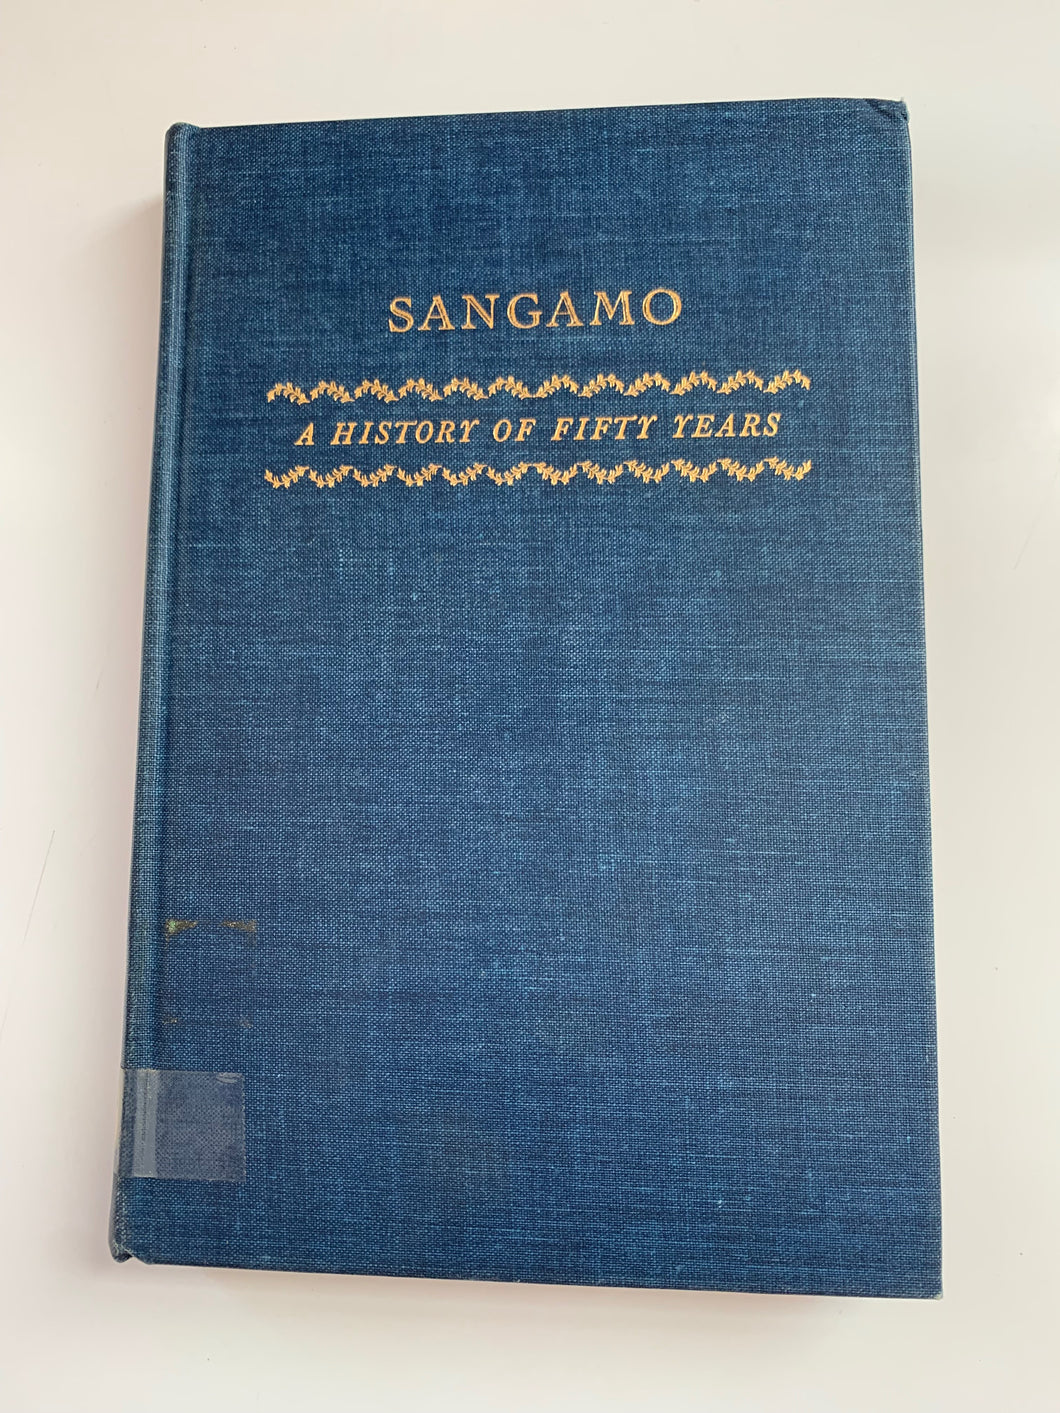 Sangamo: A History of Fifty Years by Robert Carr Lanphier